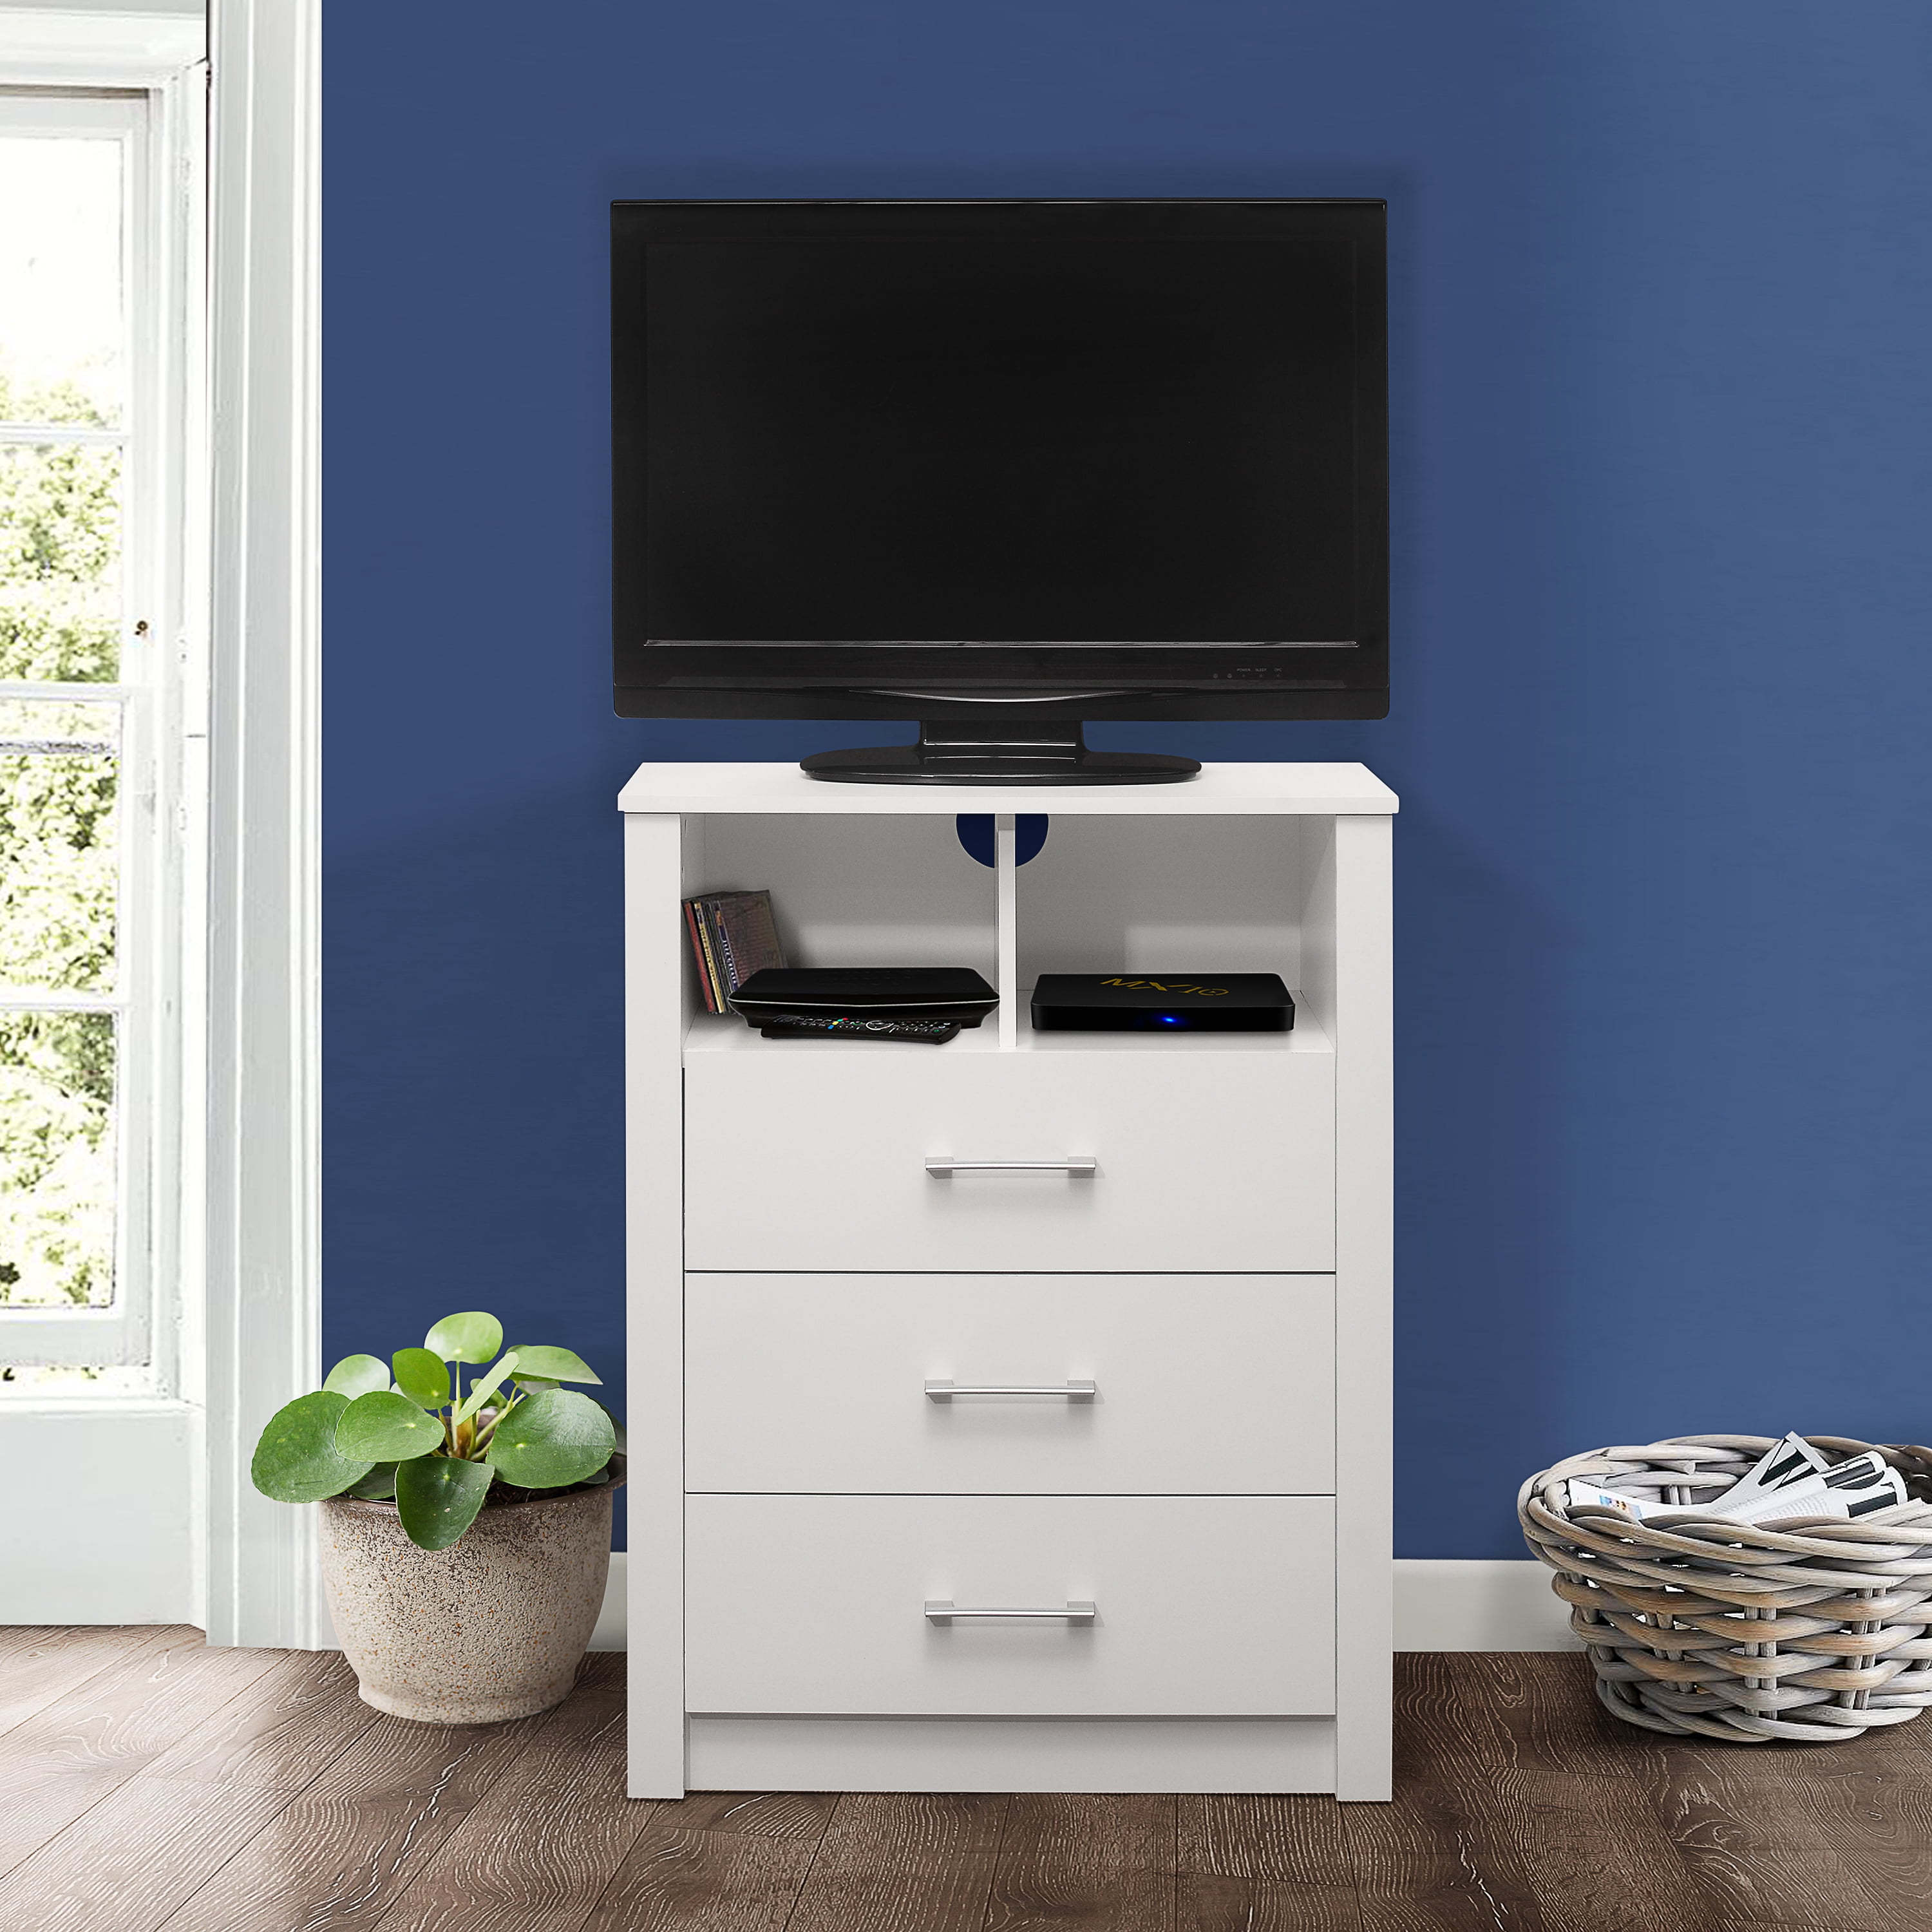 Coby 3 Drawer Dresser With Shelf White, Entertainment Center With Dresser Drawers